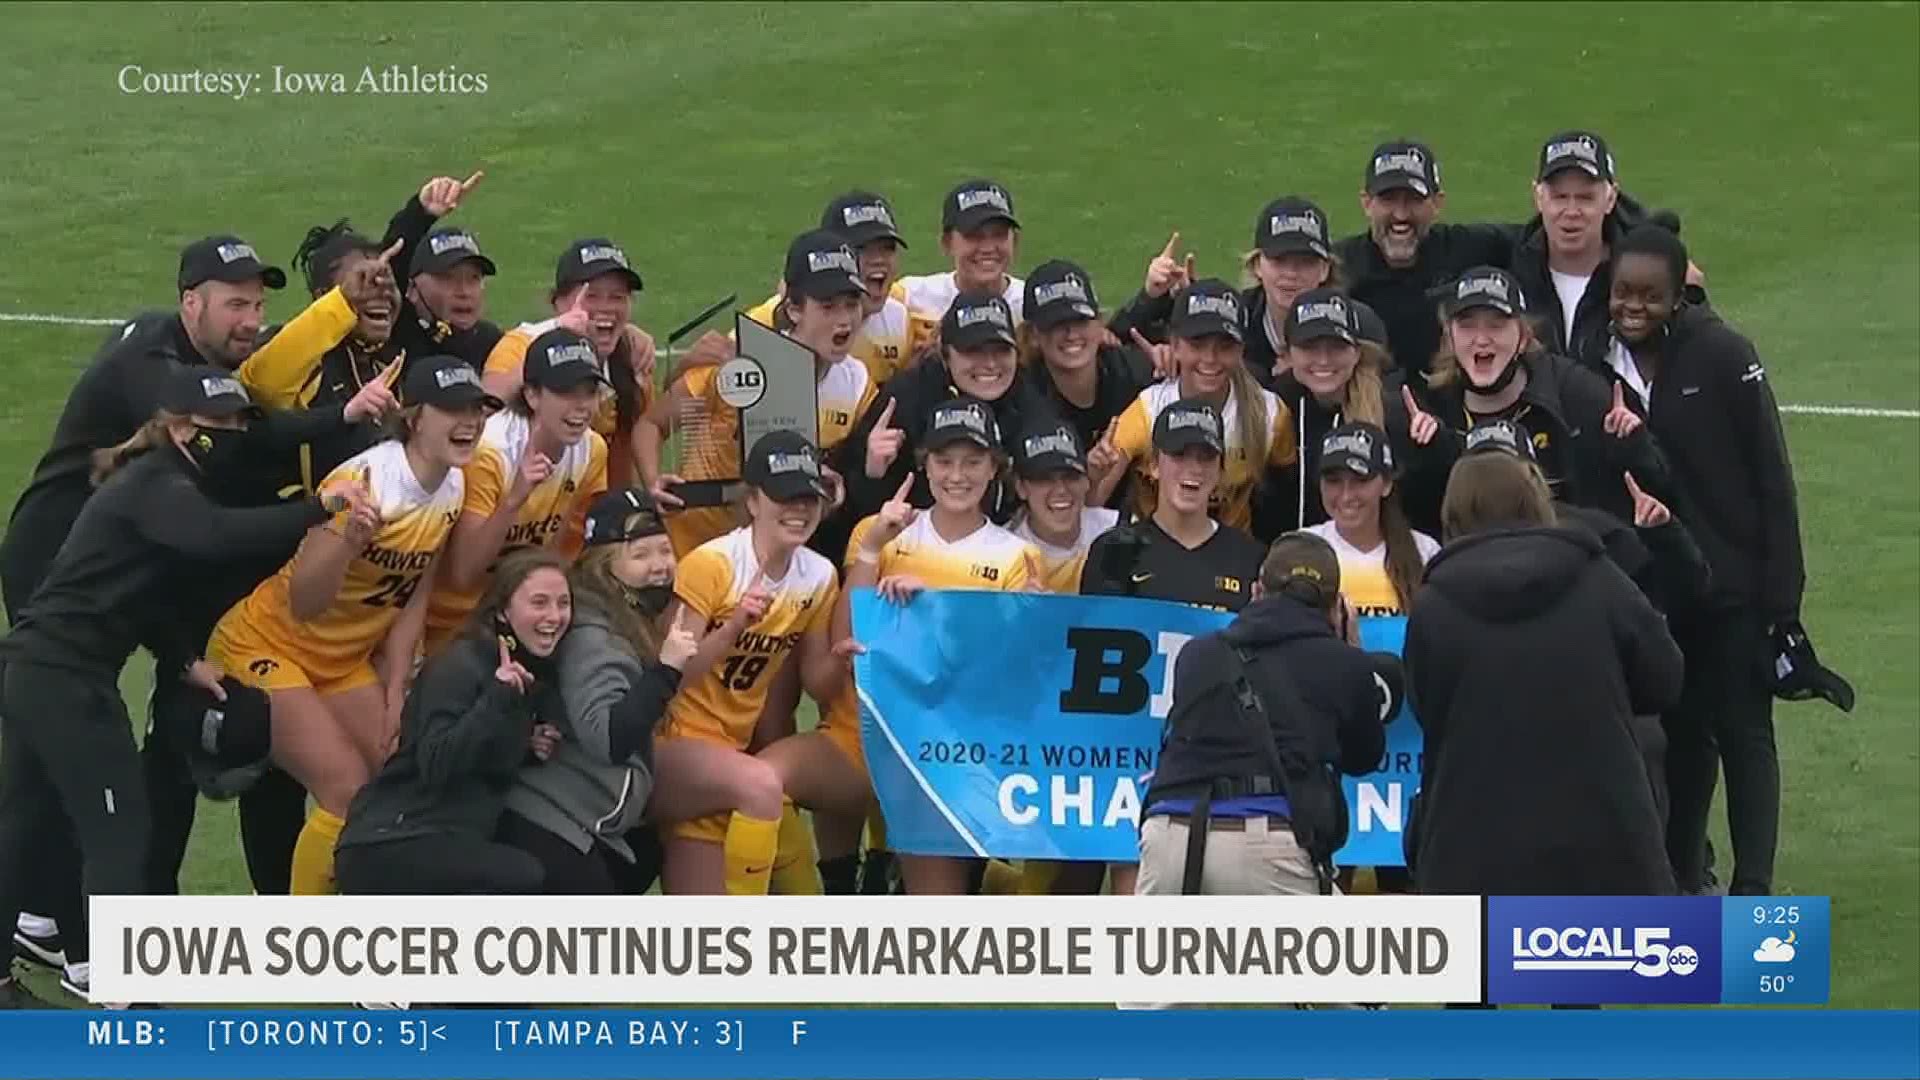 The Iowa Women's soccer team went 2-8-1 in the regular season, but won four straight to claim the Big Ten Championship and an auto-bid to the NCAA Tournament.